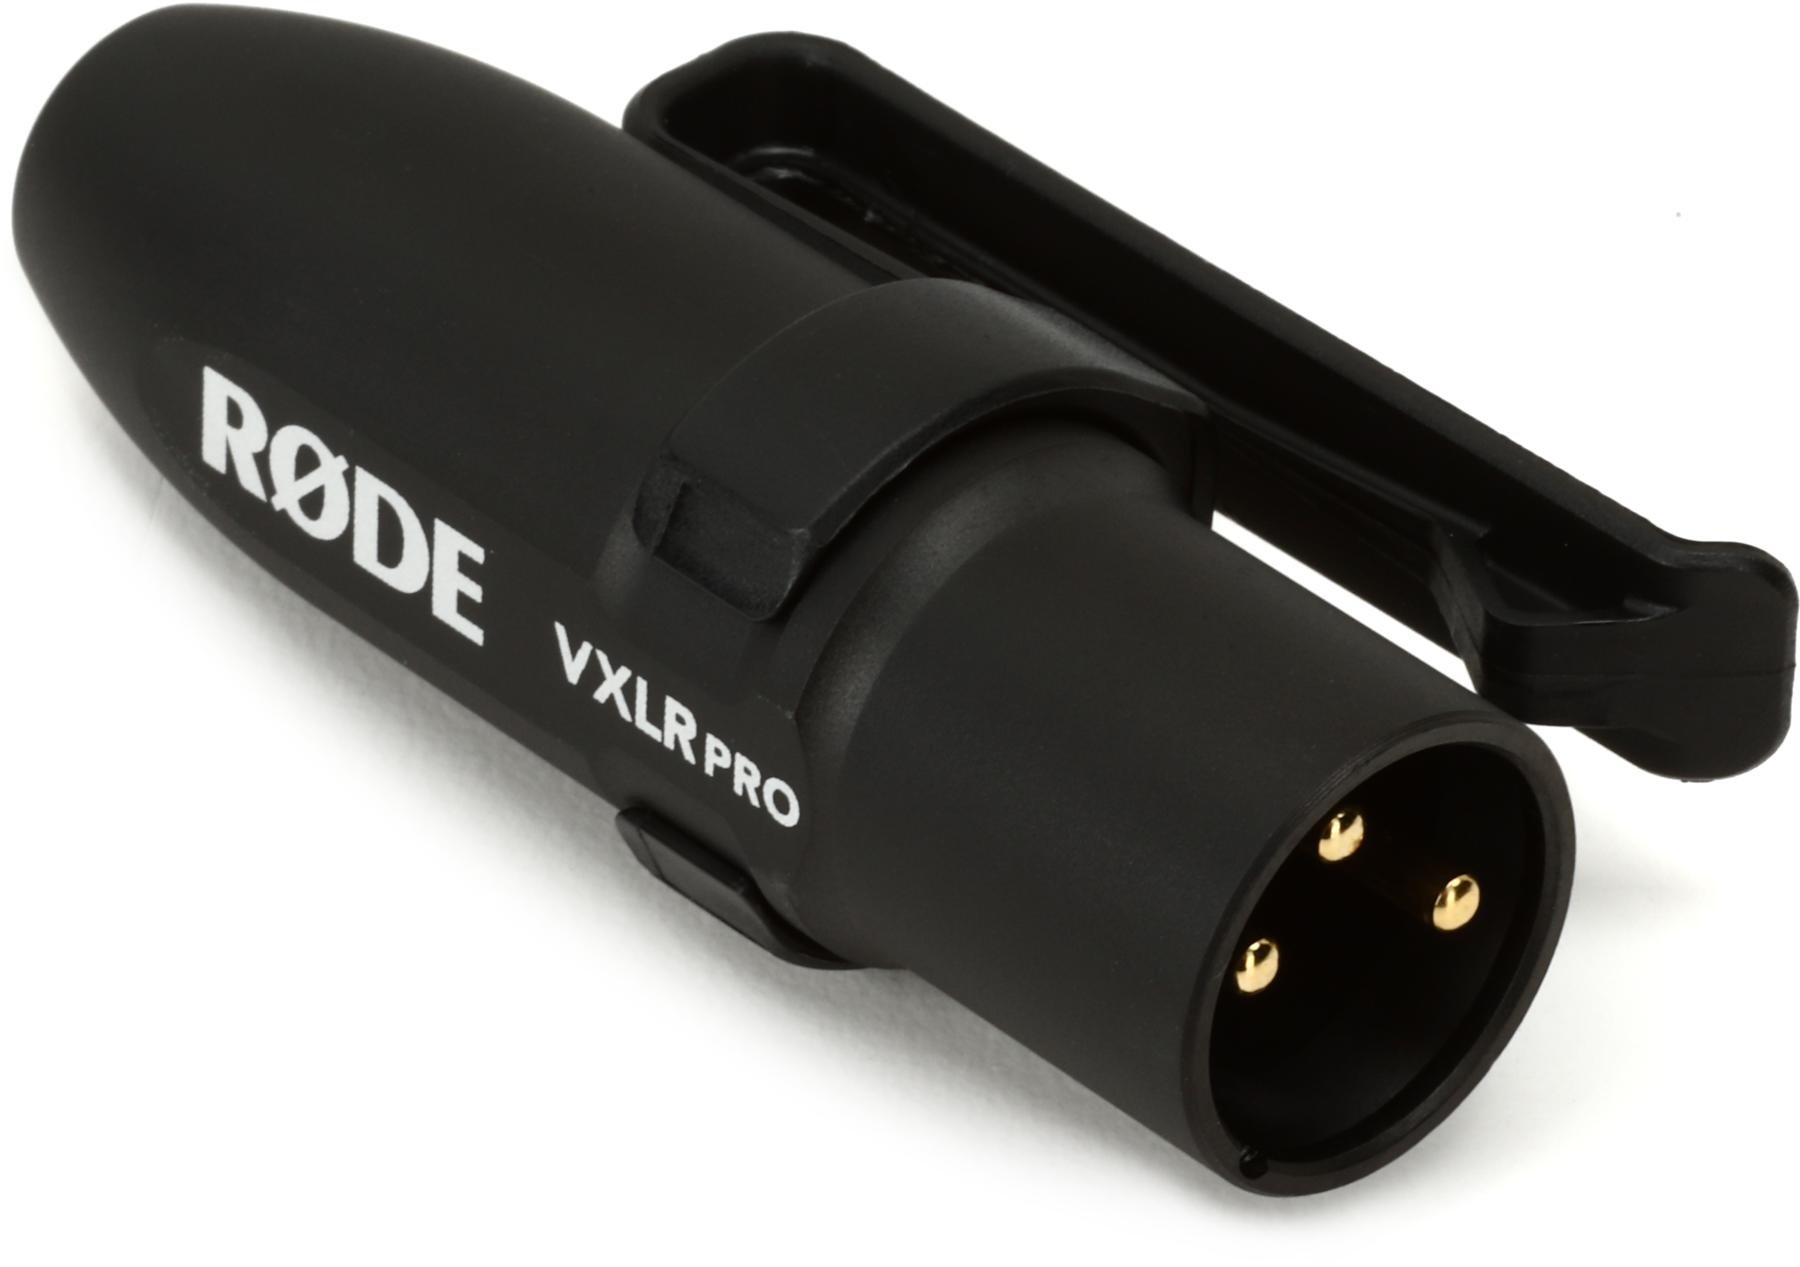 Rode VXLR Pro 3.5mm to XLR Adapter with Power Convertor | Sweetwater